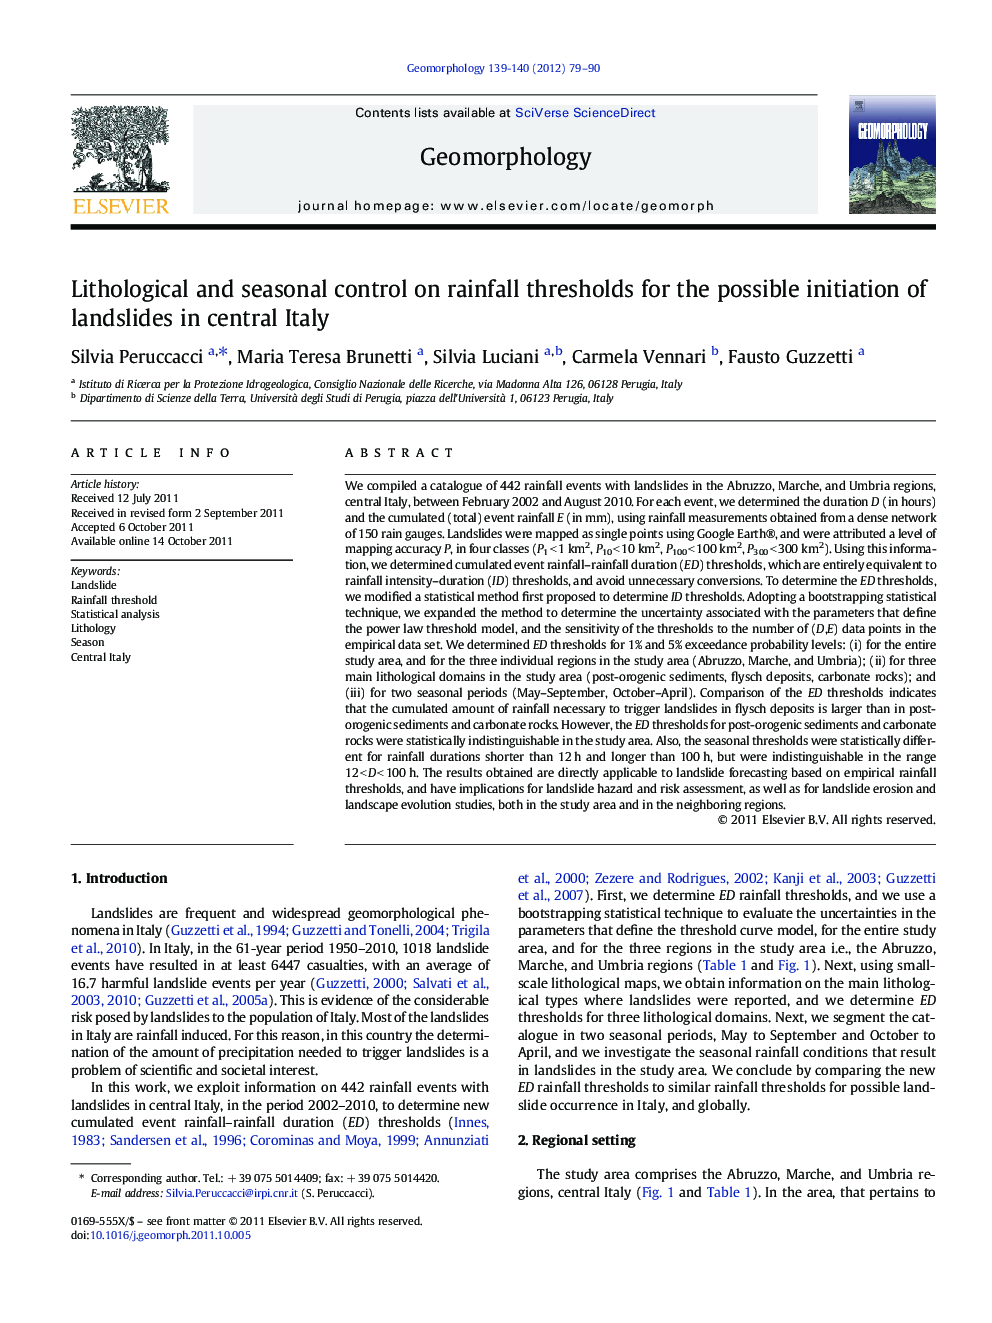 Lithological and seasonal control on rainfall thresholds for the possible initiation of landslides in central Italy